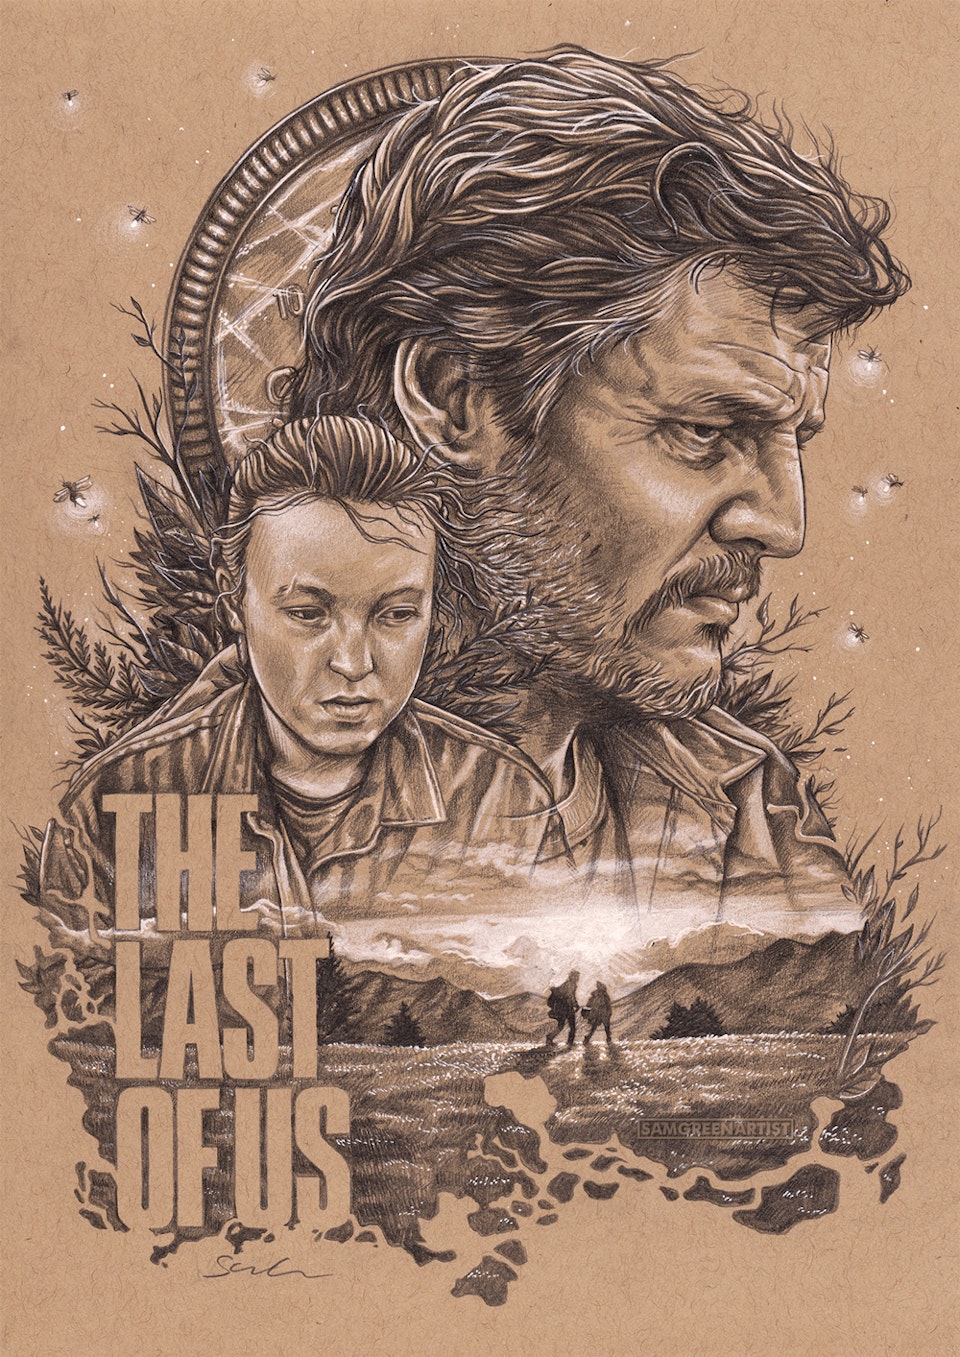 The Last of Us (HBO Series) - Original pencil sketch version.

Pencil and white ink on Strathmore toned tan paper. A4 size.